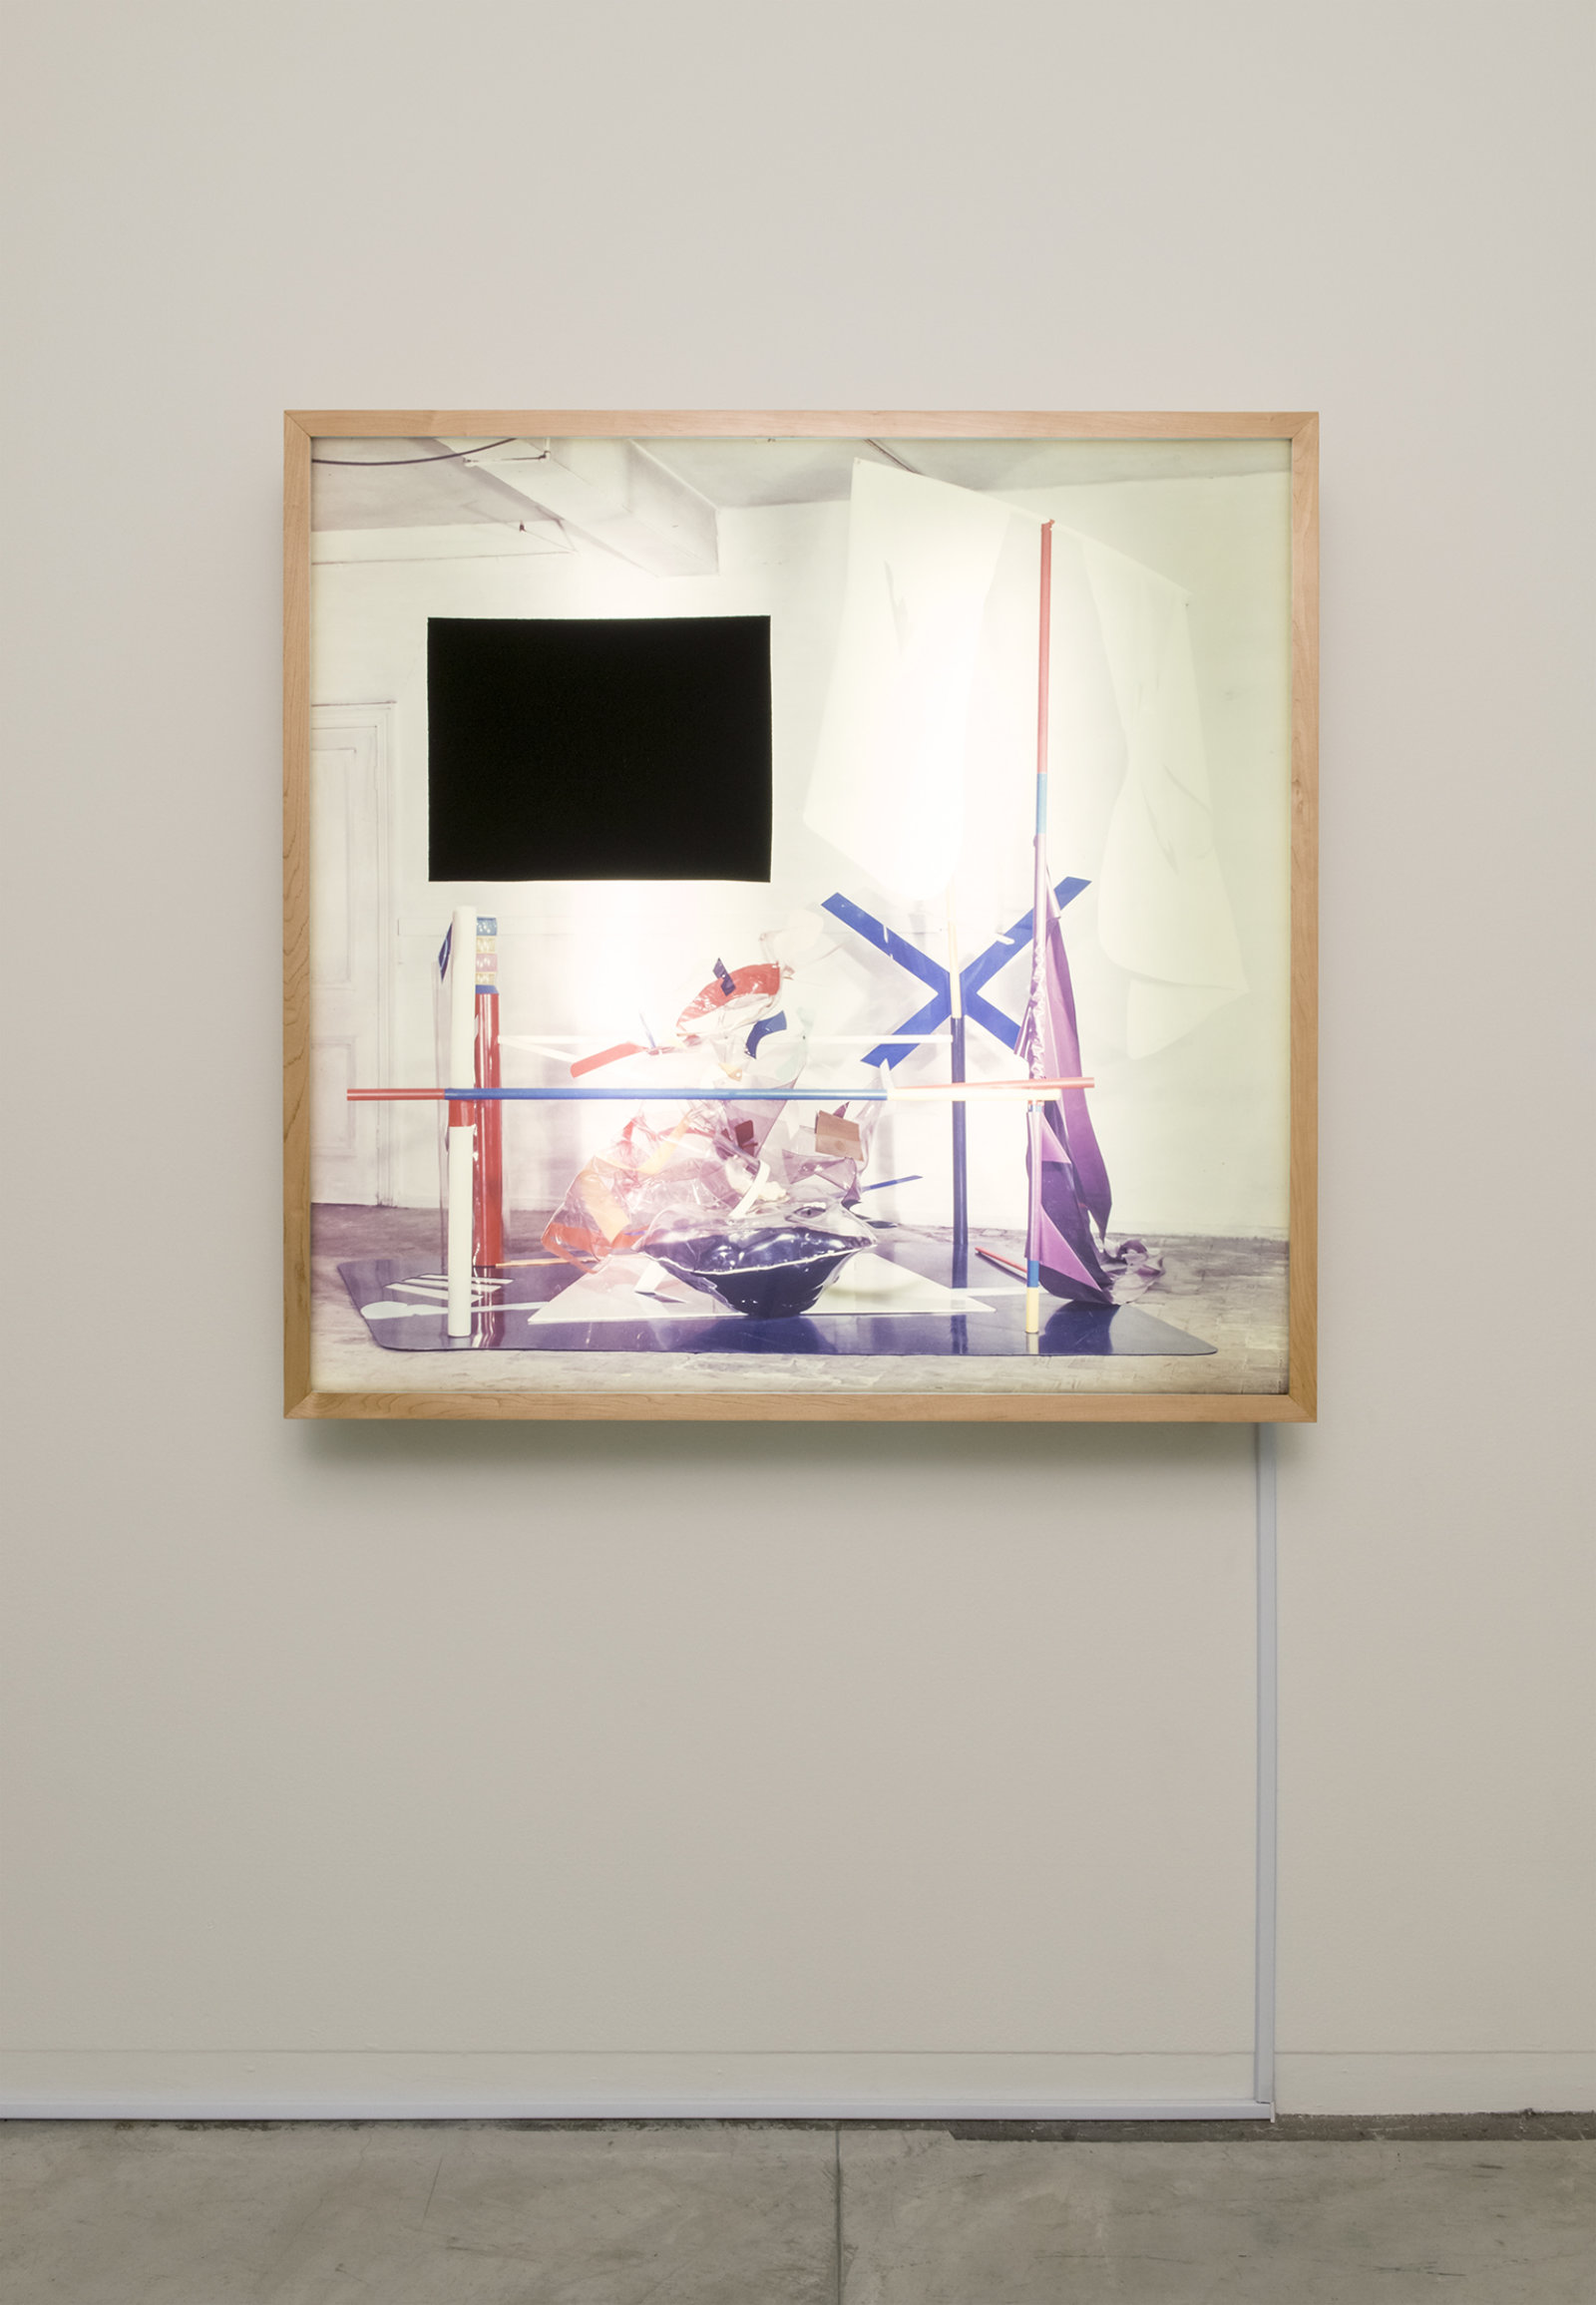 Jerry Pethick, Raft, Offering and Surround, 1968, transparency in lightbox, dimensions variable